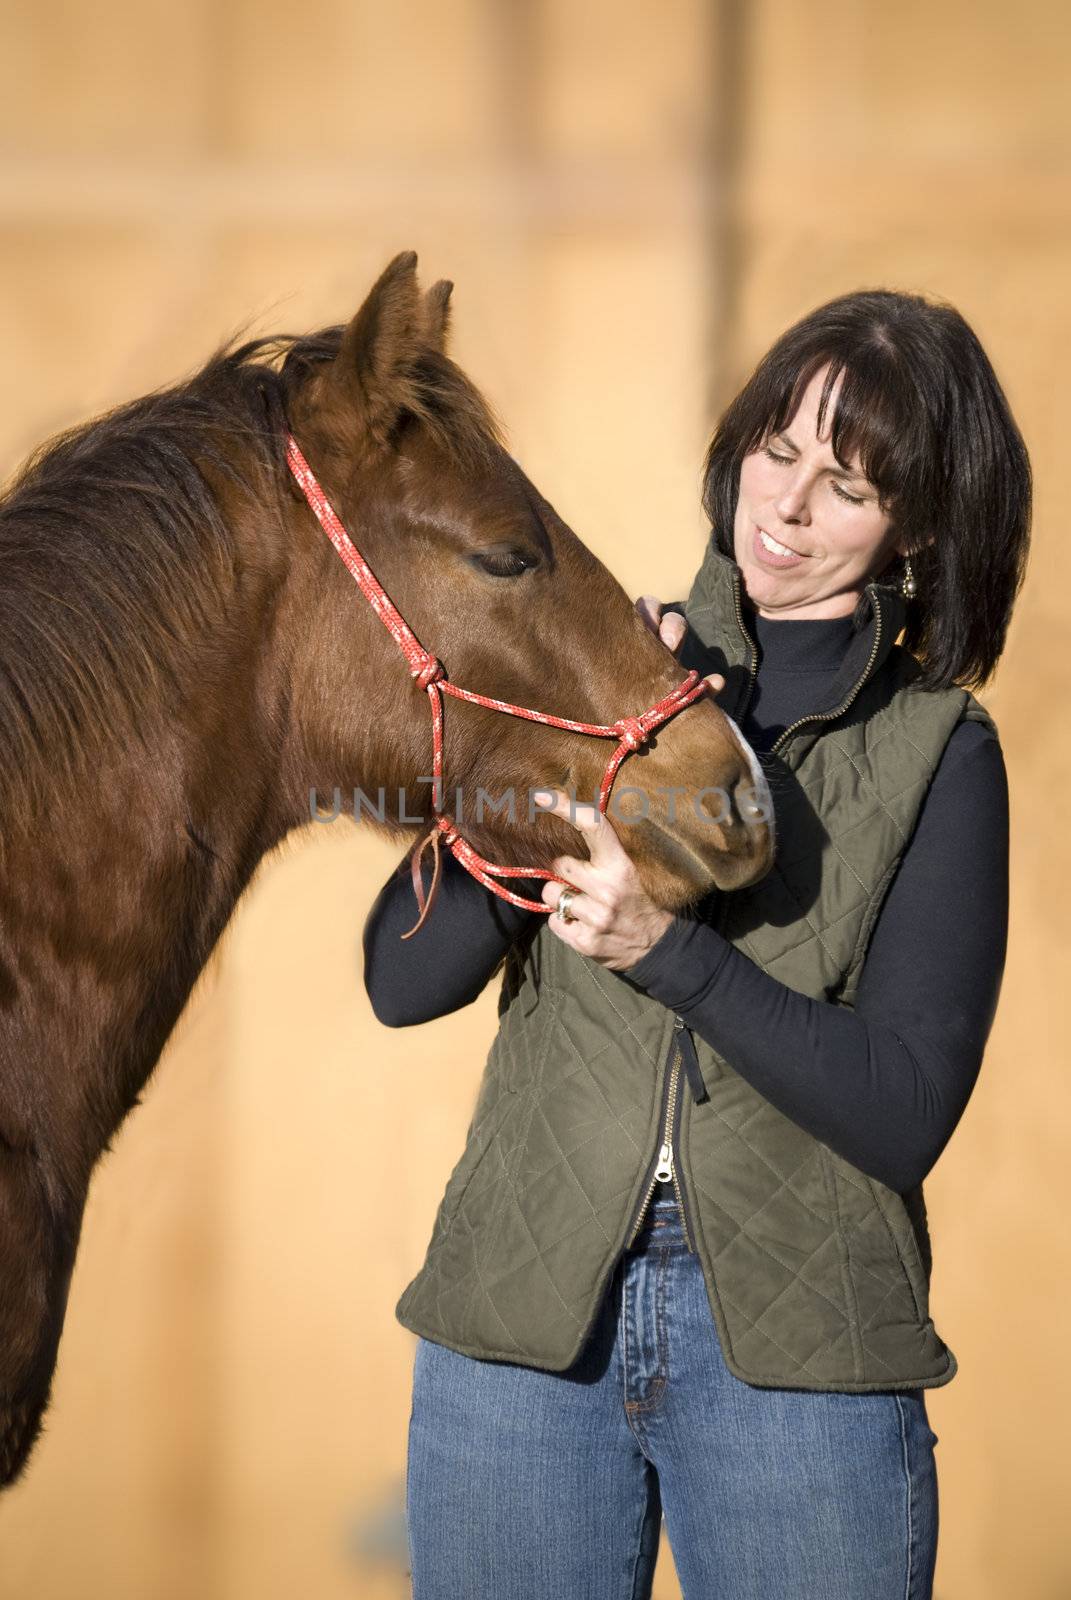 Pretty dark haired woman standing with her sorrel (chestnut) quarter horse foal against an out of focus barn.